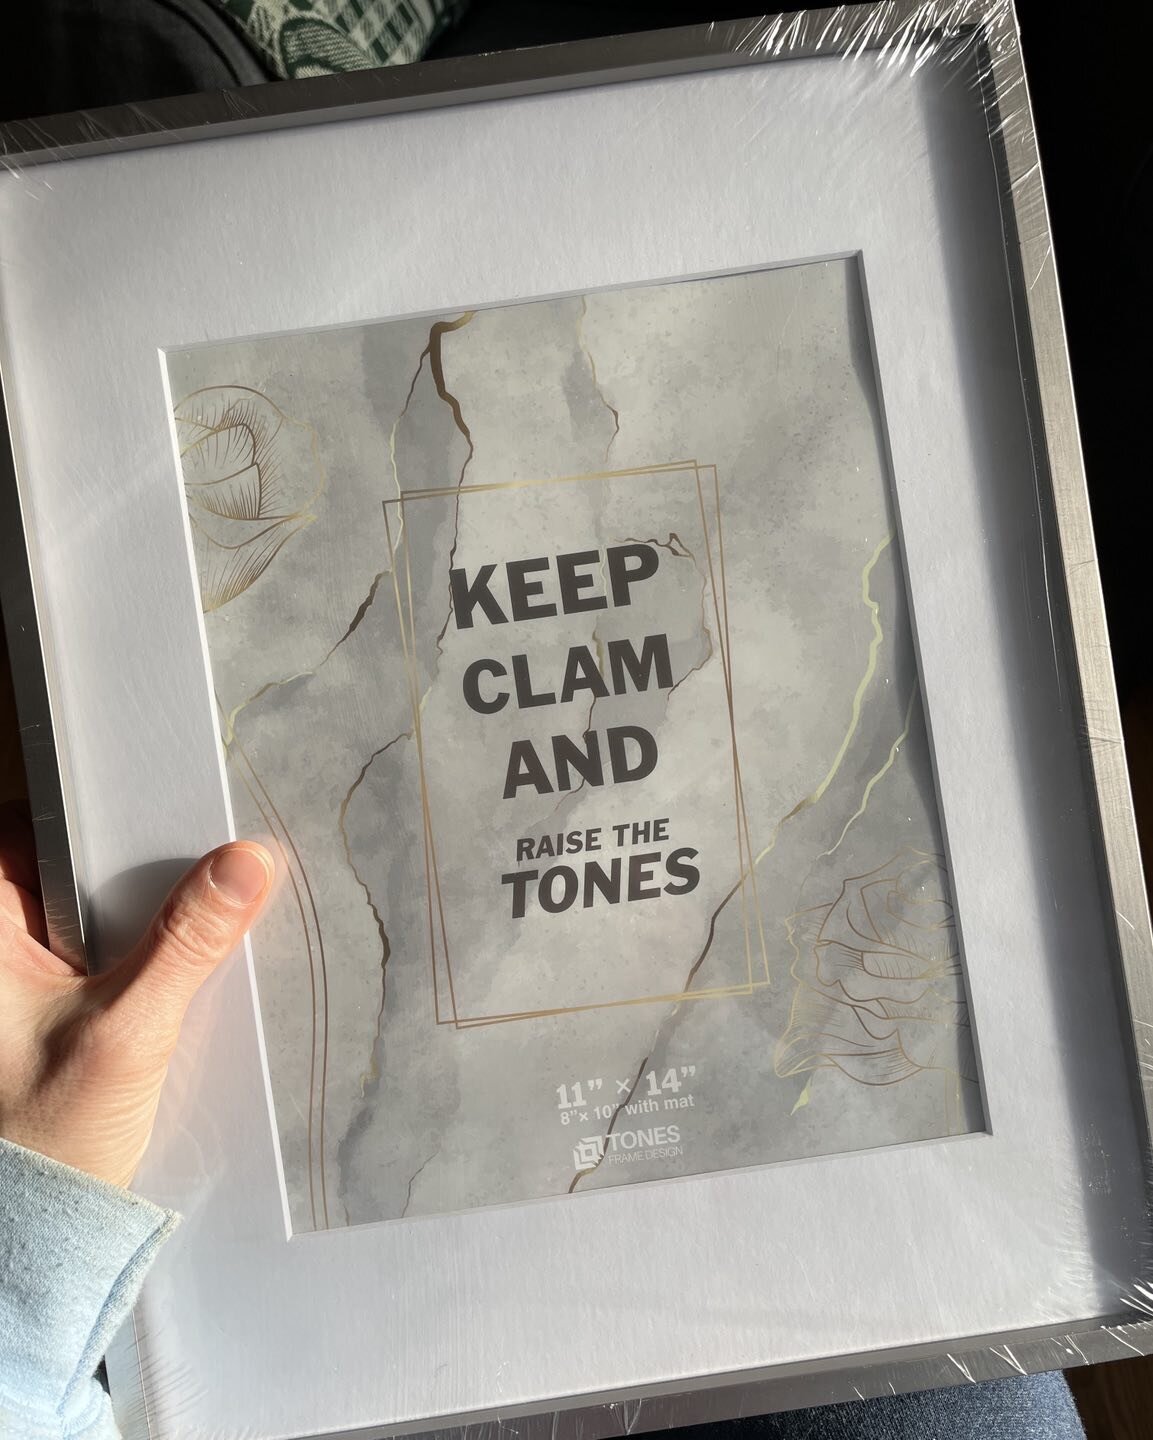 There&rsquo;s a lot of choices out there when choosing framing options for your artwork&hellip;have to admit that this typo tipped the balance toward me choosing this particular one. LOL! #typos #framingart #keepclam